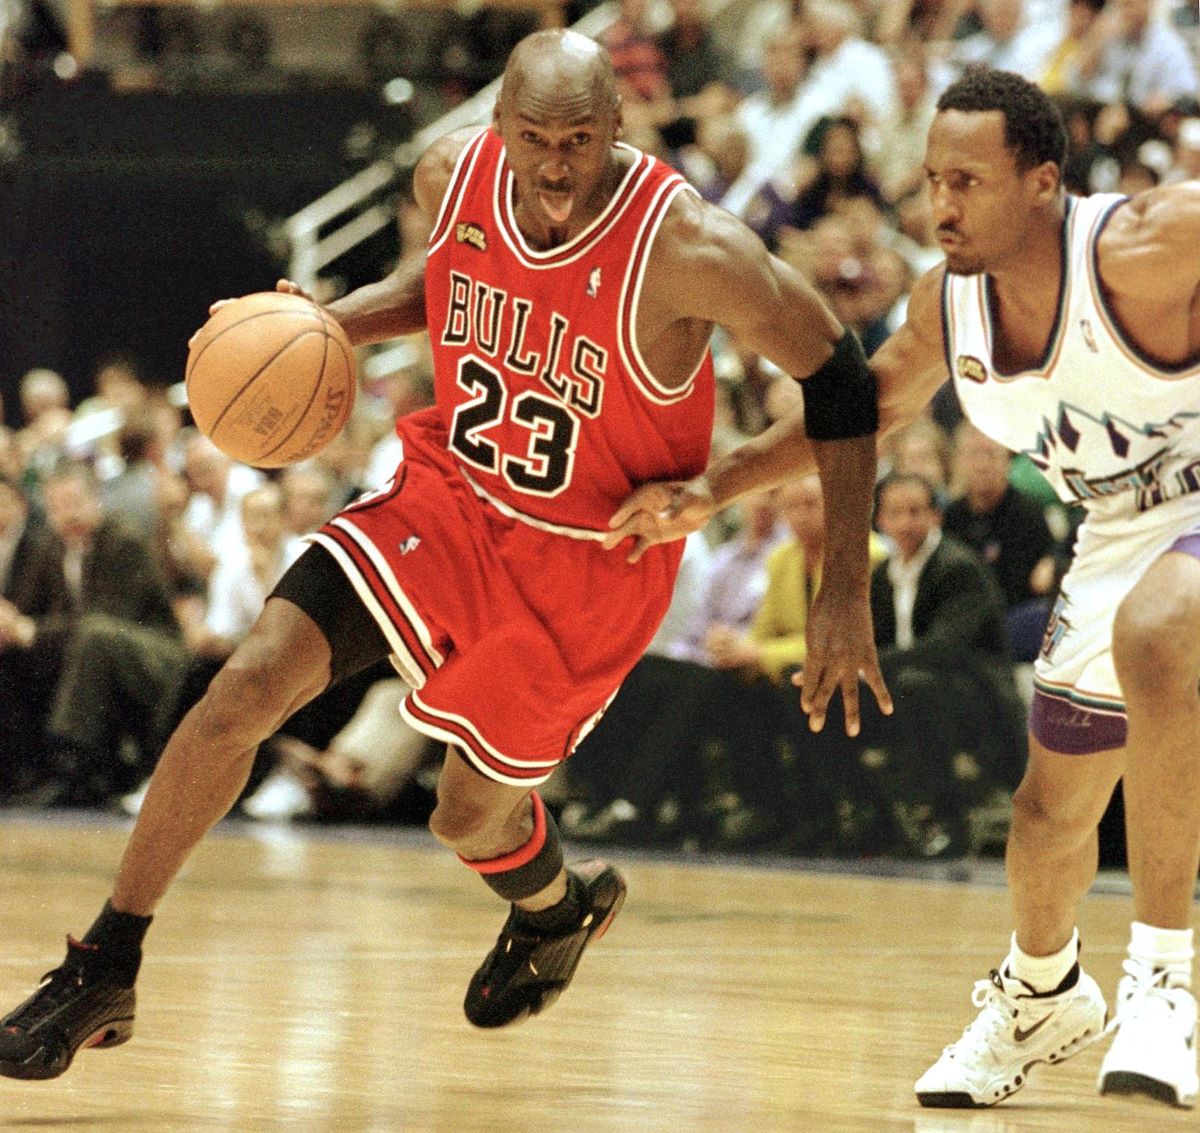 Michael Jordan Had Jazz Players in Awe After Scoring 45 Points, Getting Game-Winning Steal and Hitting Game-Winning Jumper in Game 6 of ‘98 Finals: ‘You Just Saw the Best Player Who Ever Played the Game Take His Team on His Shoulders and There Was Nothing We Could Do About It’